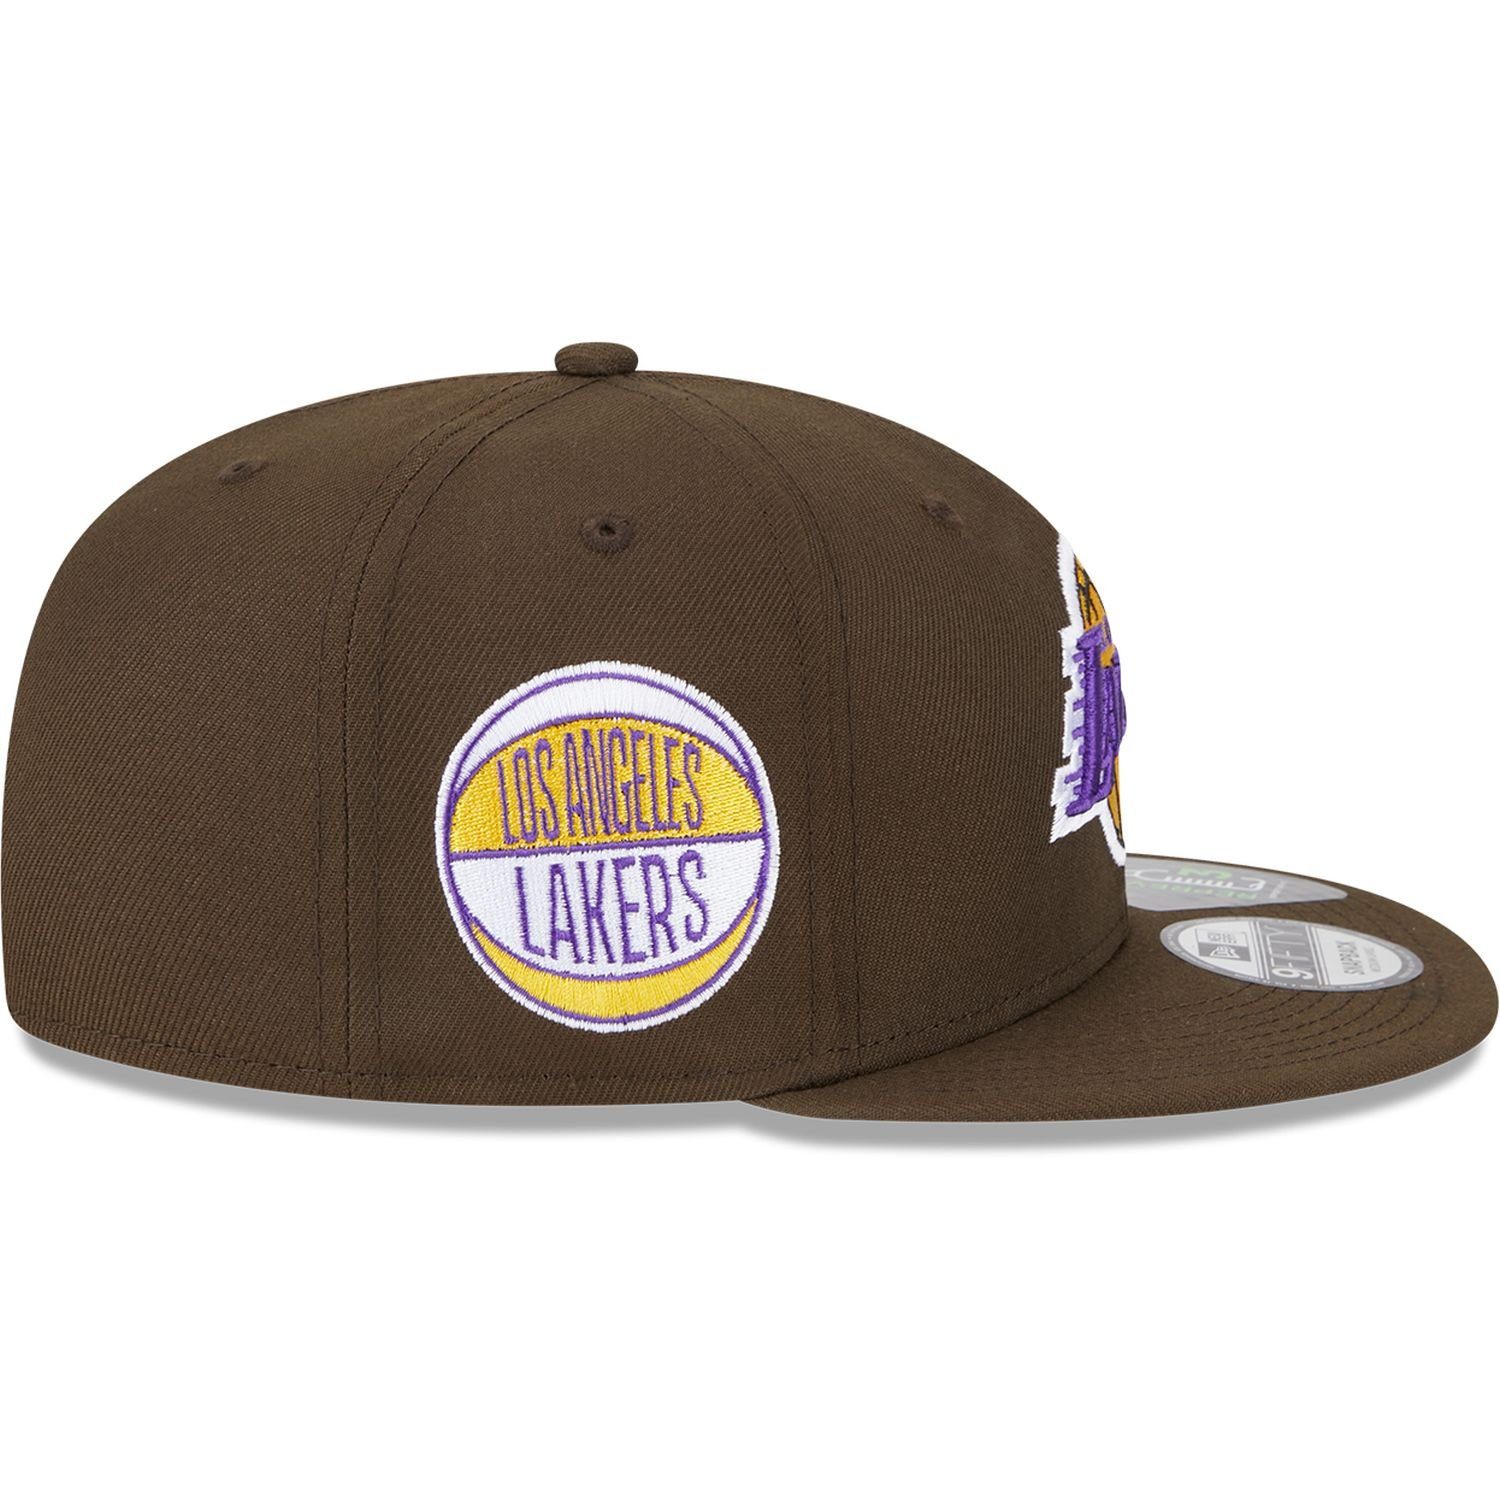 SIDEPATCH 9Fifty Cap Los Snapback New Lakers Angeles Era